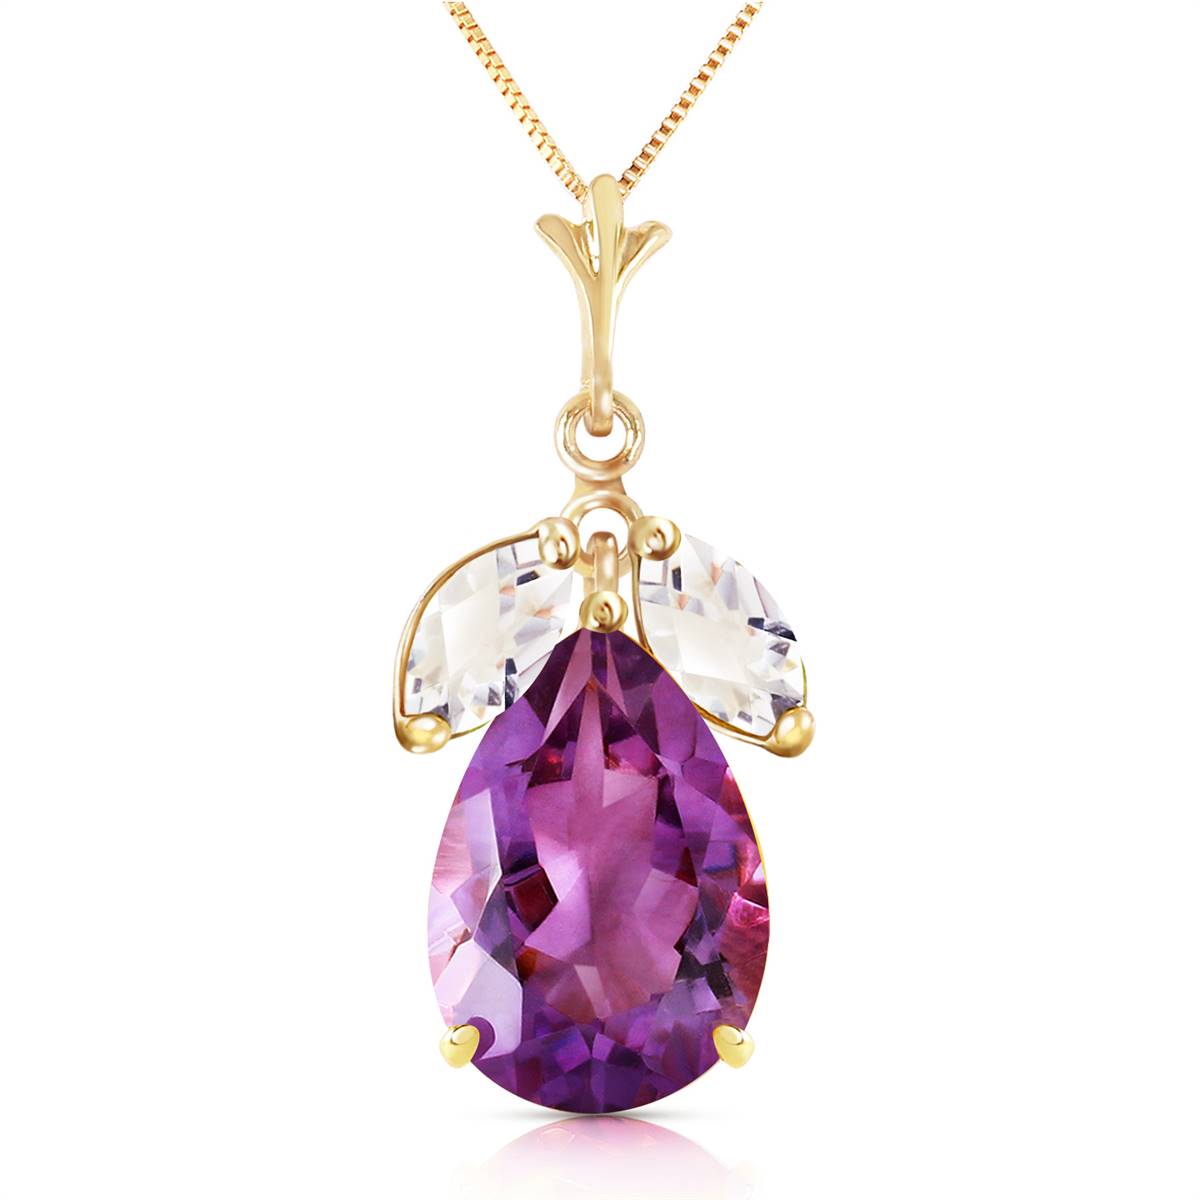 6.5 Carat 14K Solid Yellow Gold Necklace Purple Amethyst White Topaz